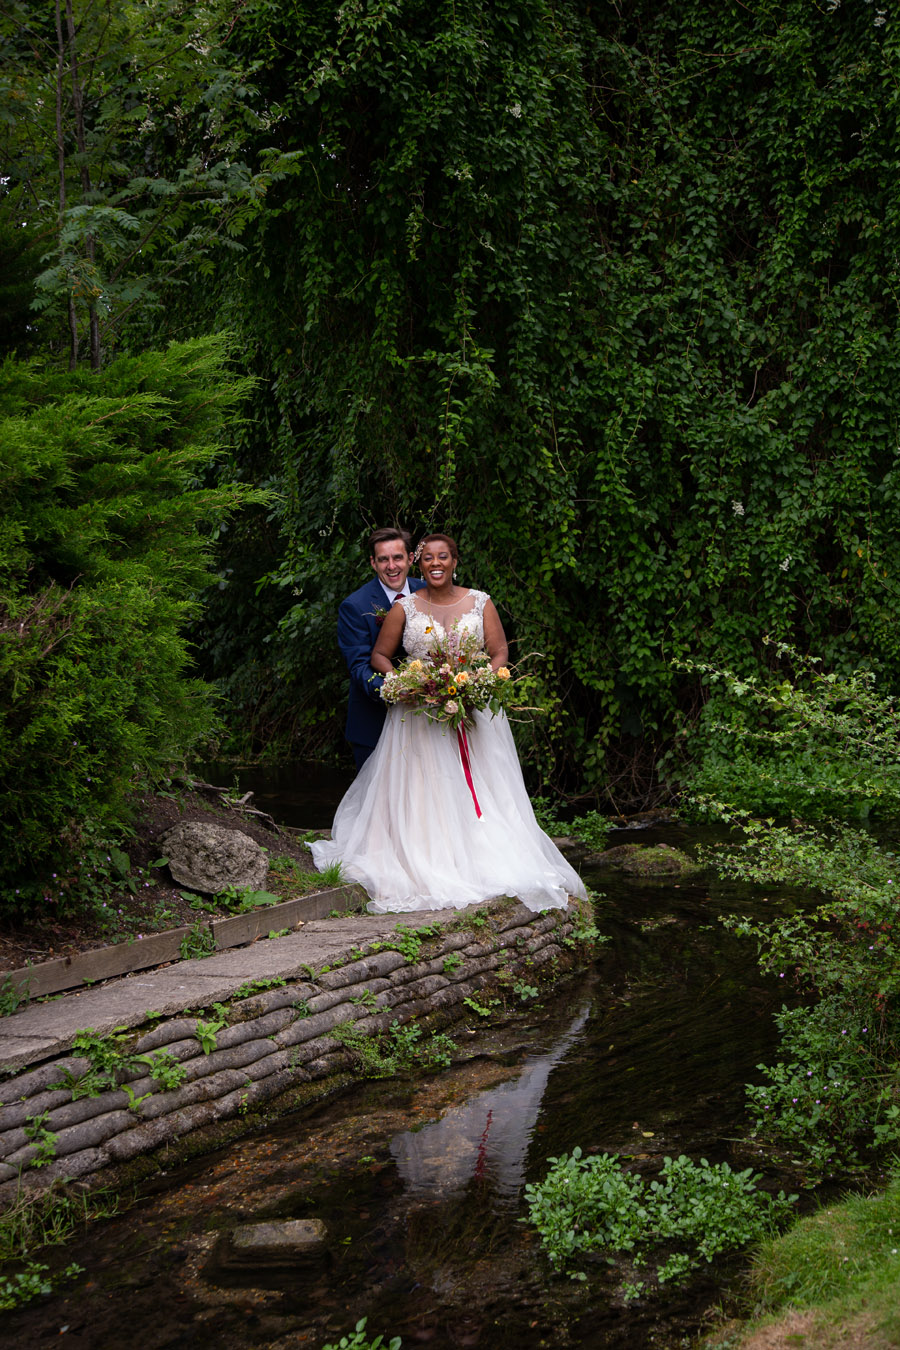 A Magical Wedding World with a Cascade of Colours from Passionate Reds through to the Palest Pinks, with Barefoot Photography (8)